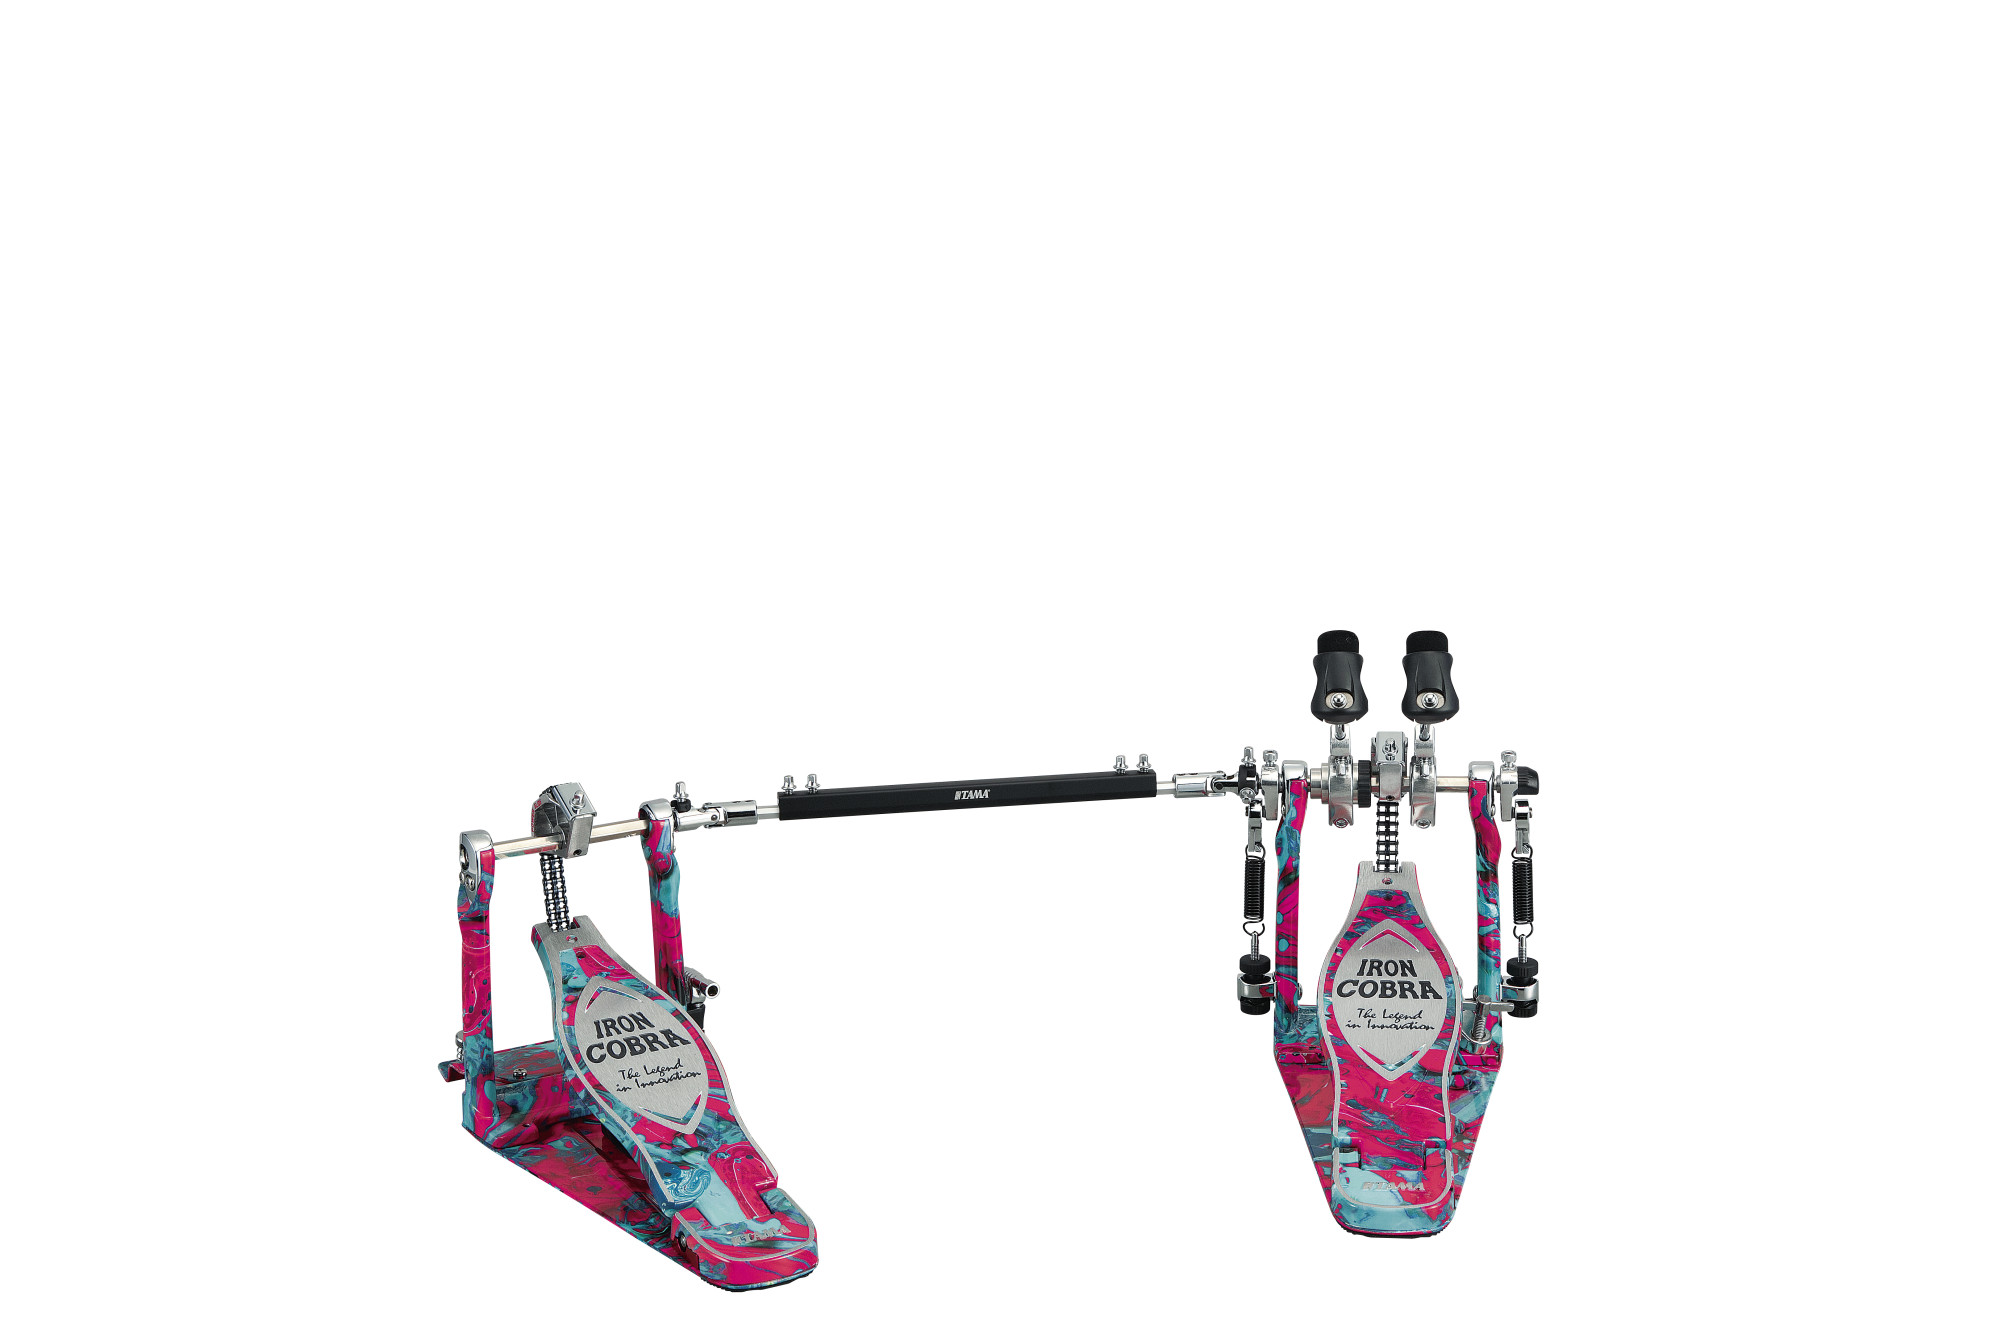 HP900PWMCS 50th Limited Iron Cobra Power Glide Twin Pedal - Marble Coral Swirl